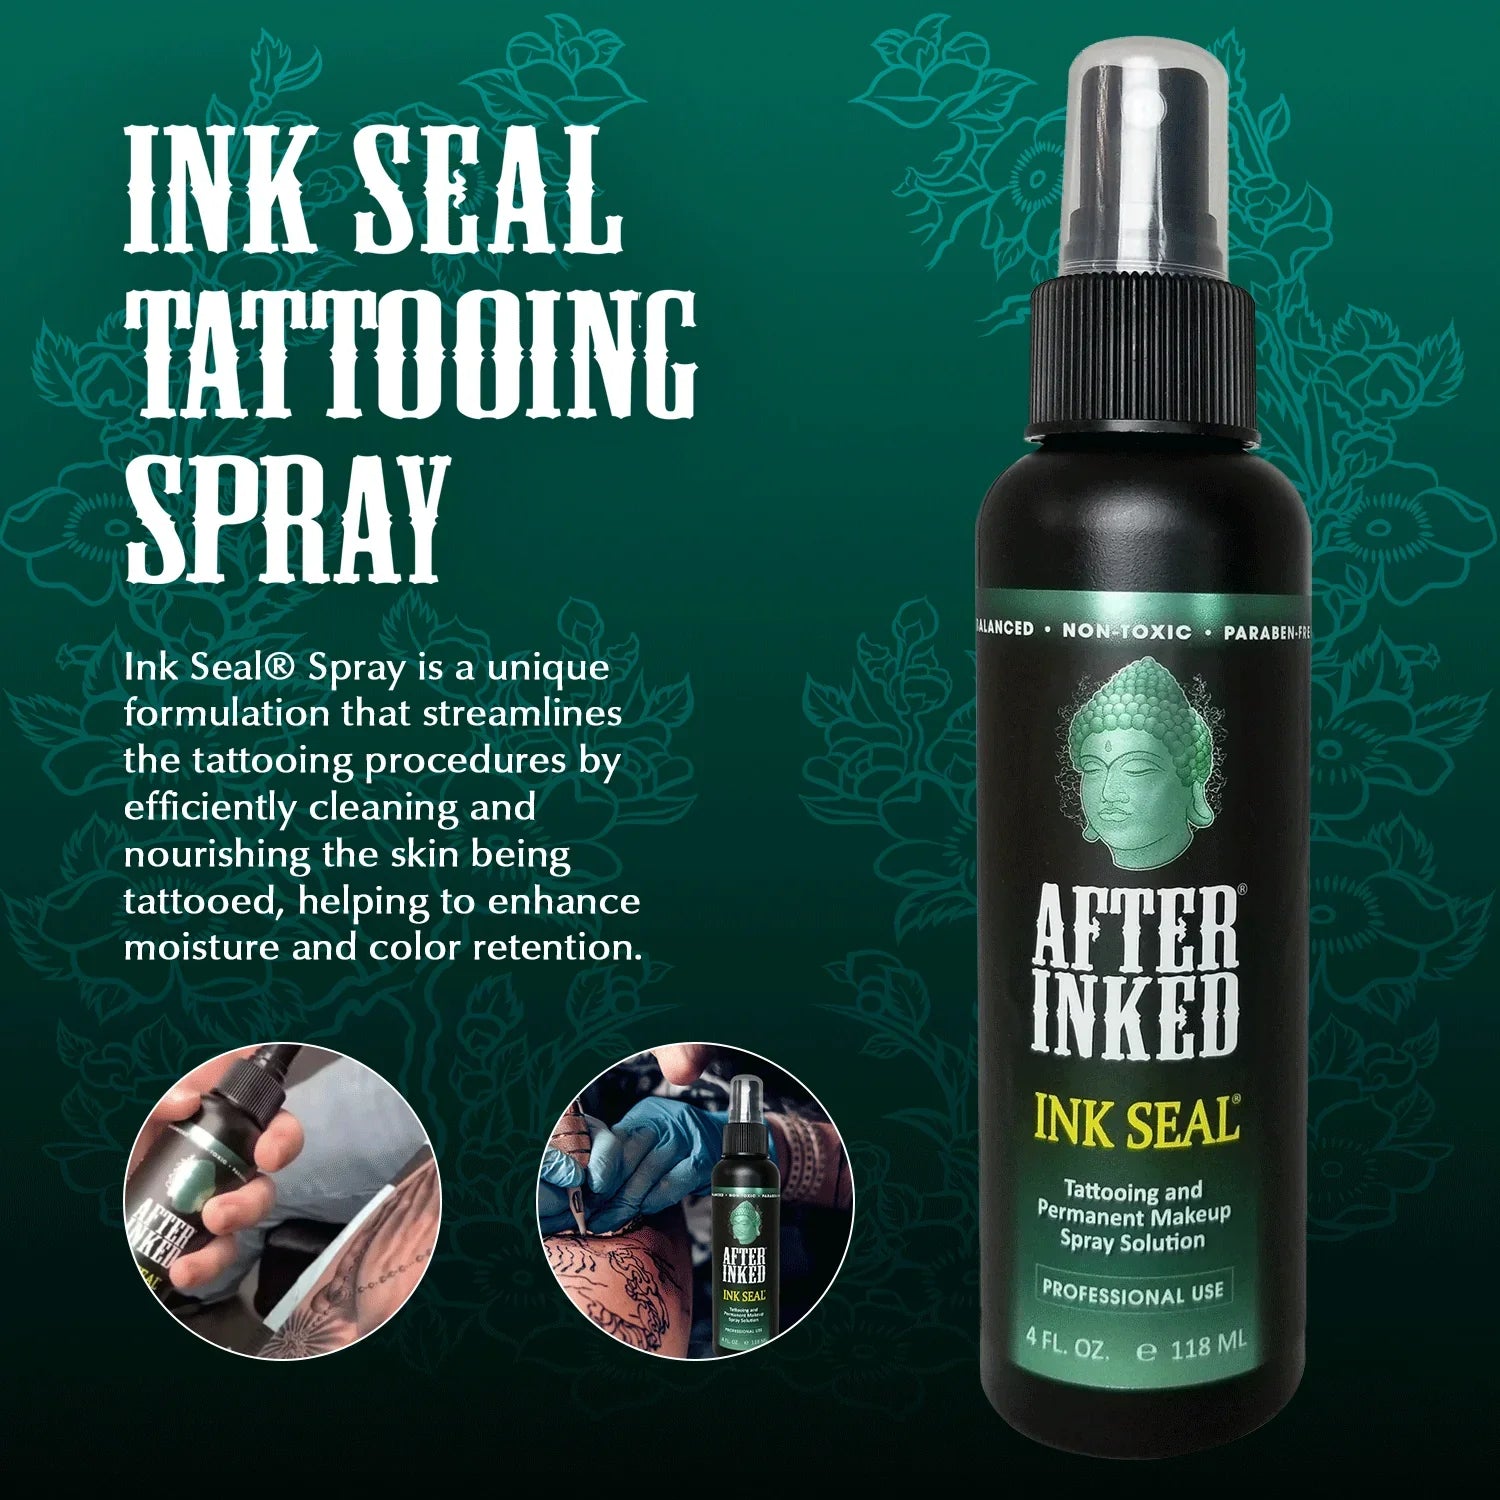 After Inked Ink Seal Spray